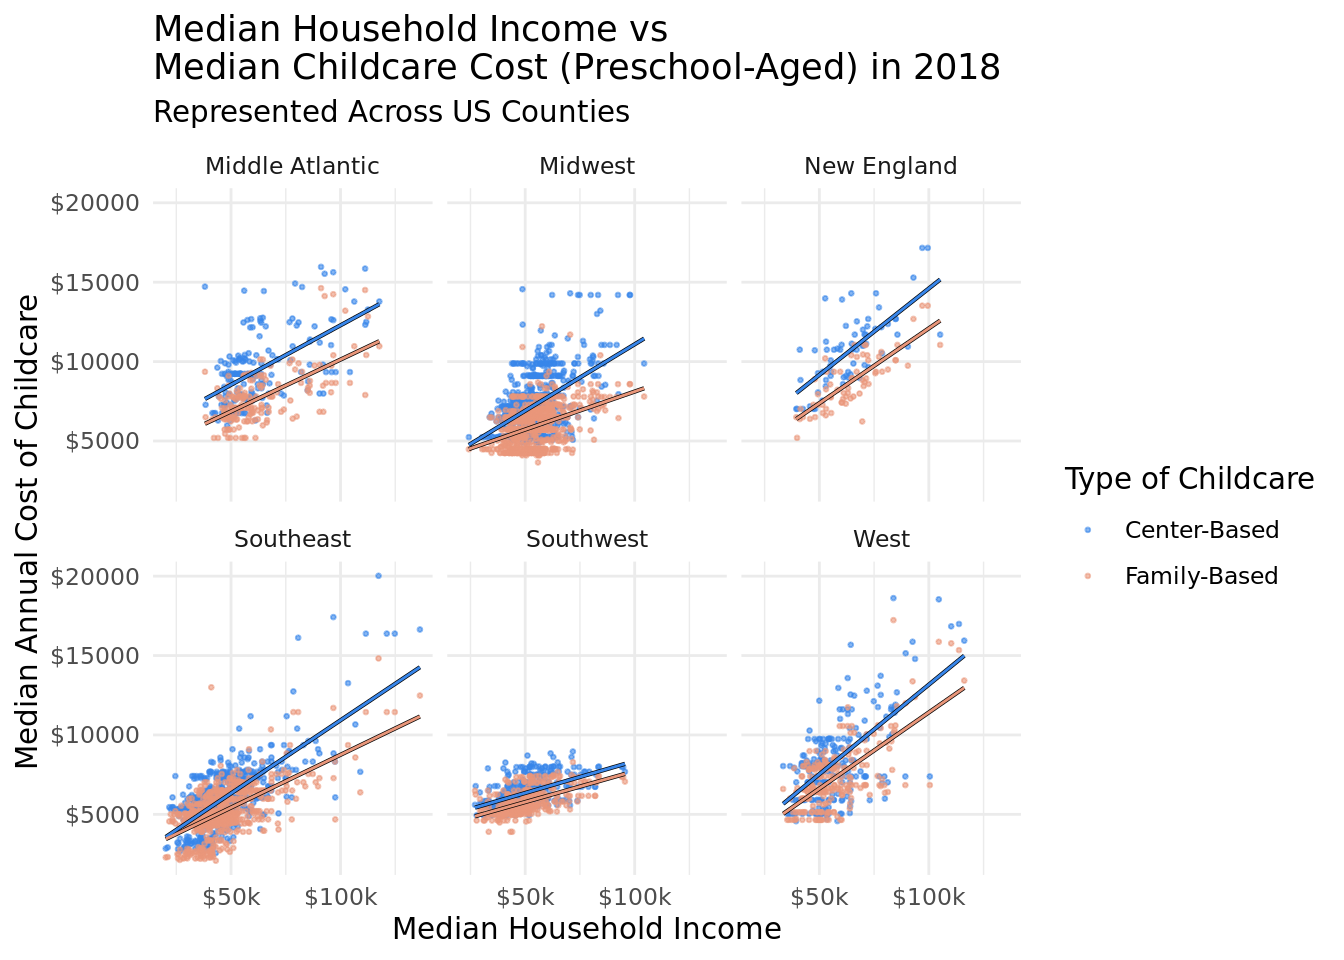 Median Household Income and Childcare Costs by US Region